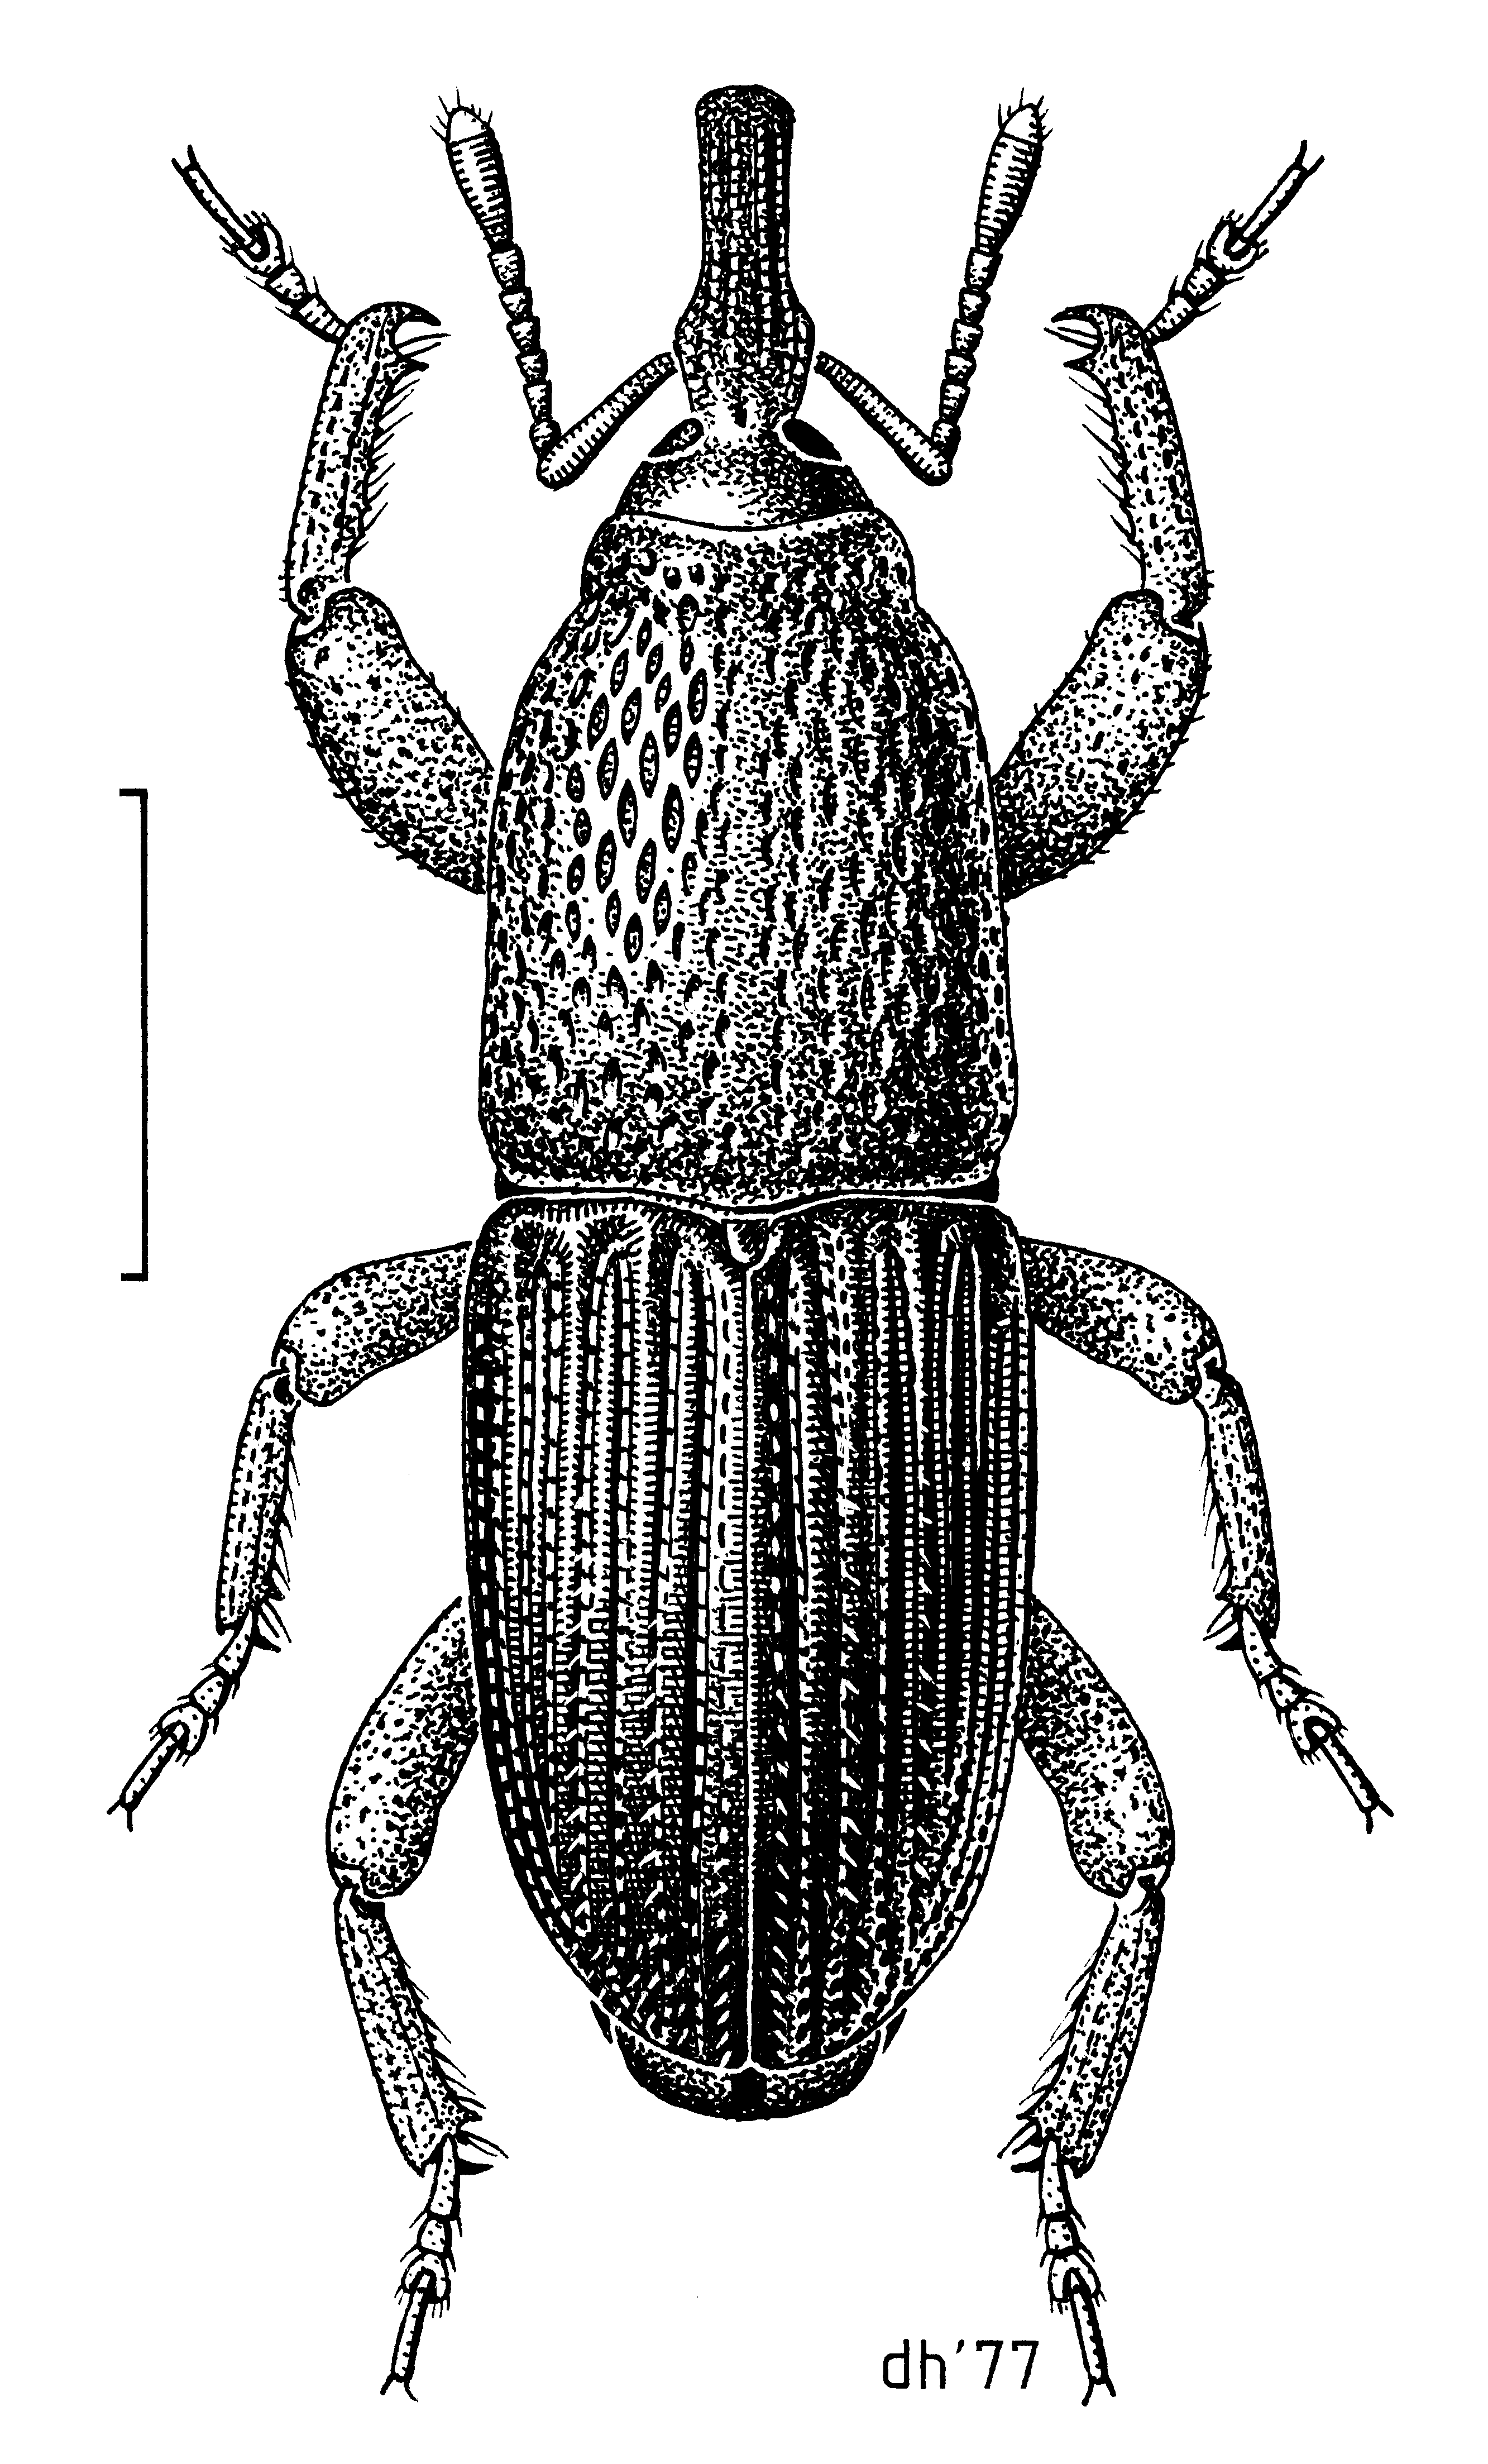 Weevils  Facts & Identification, Control & Prevention